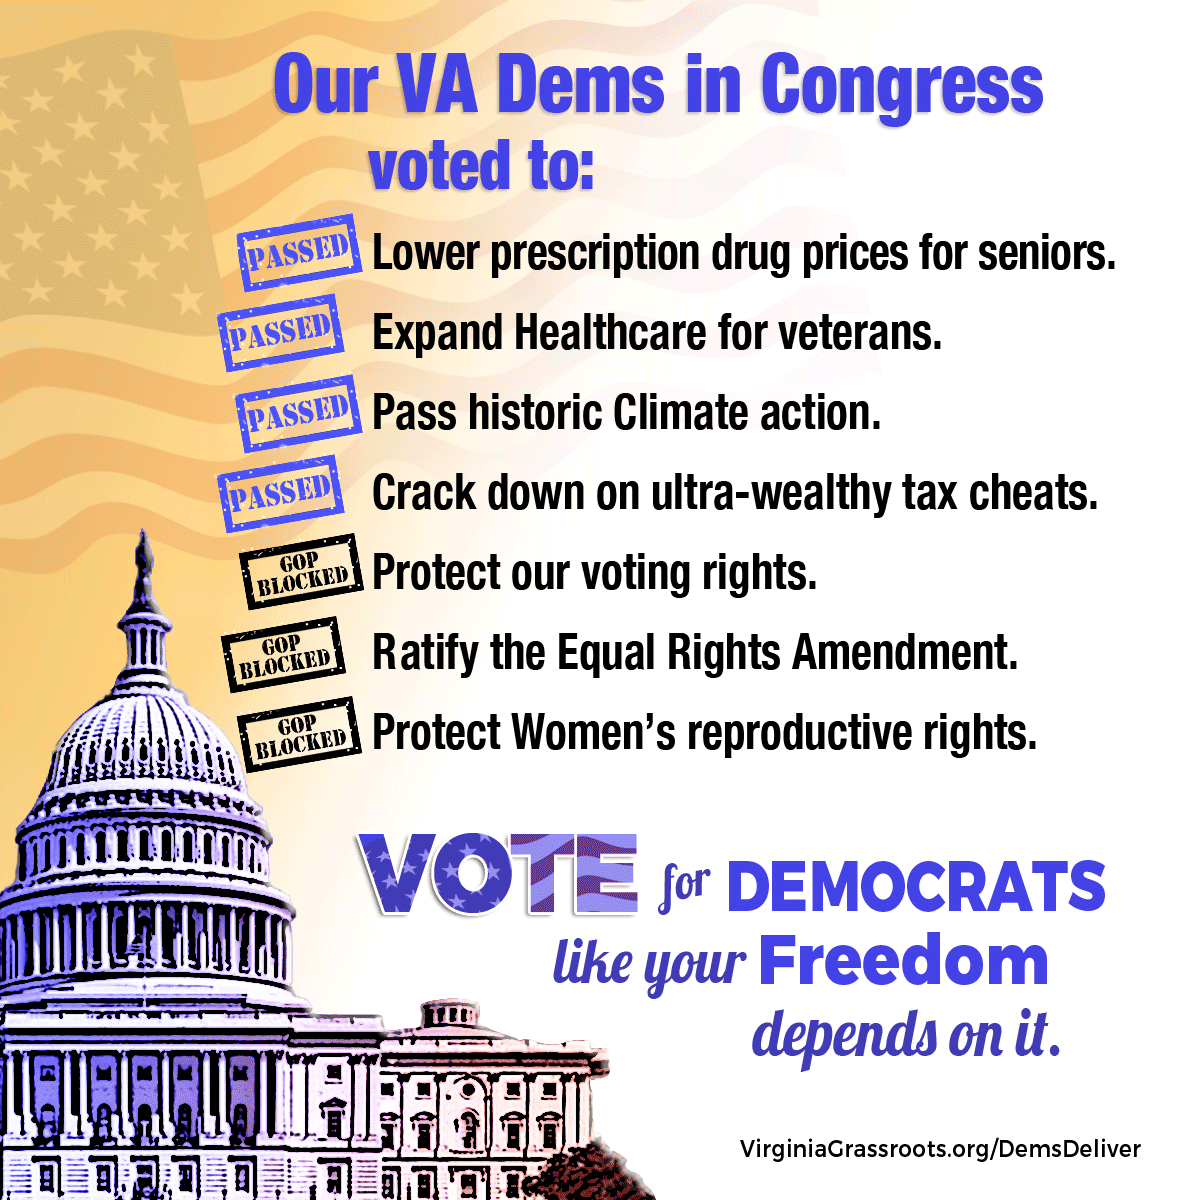 Virginia Democrats ALL voted for healthcare, clean energy, Veteran's benefits, and other legislation that will improve people's lives. 